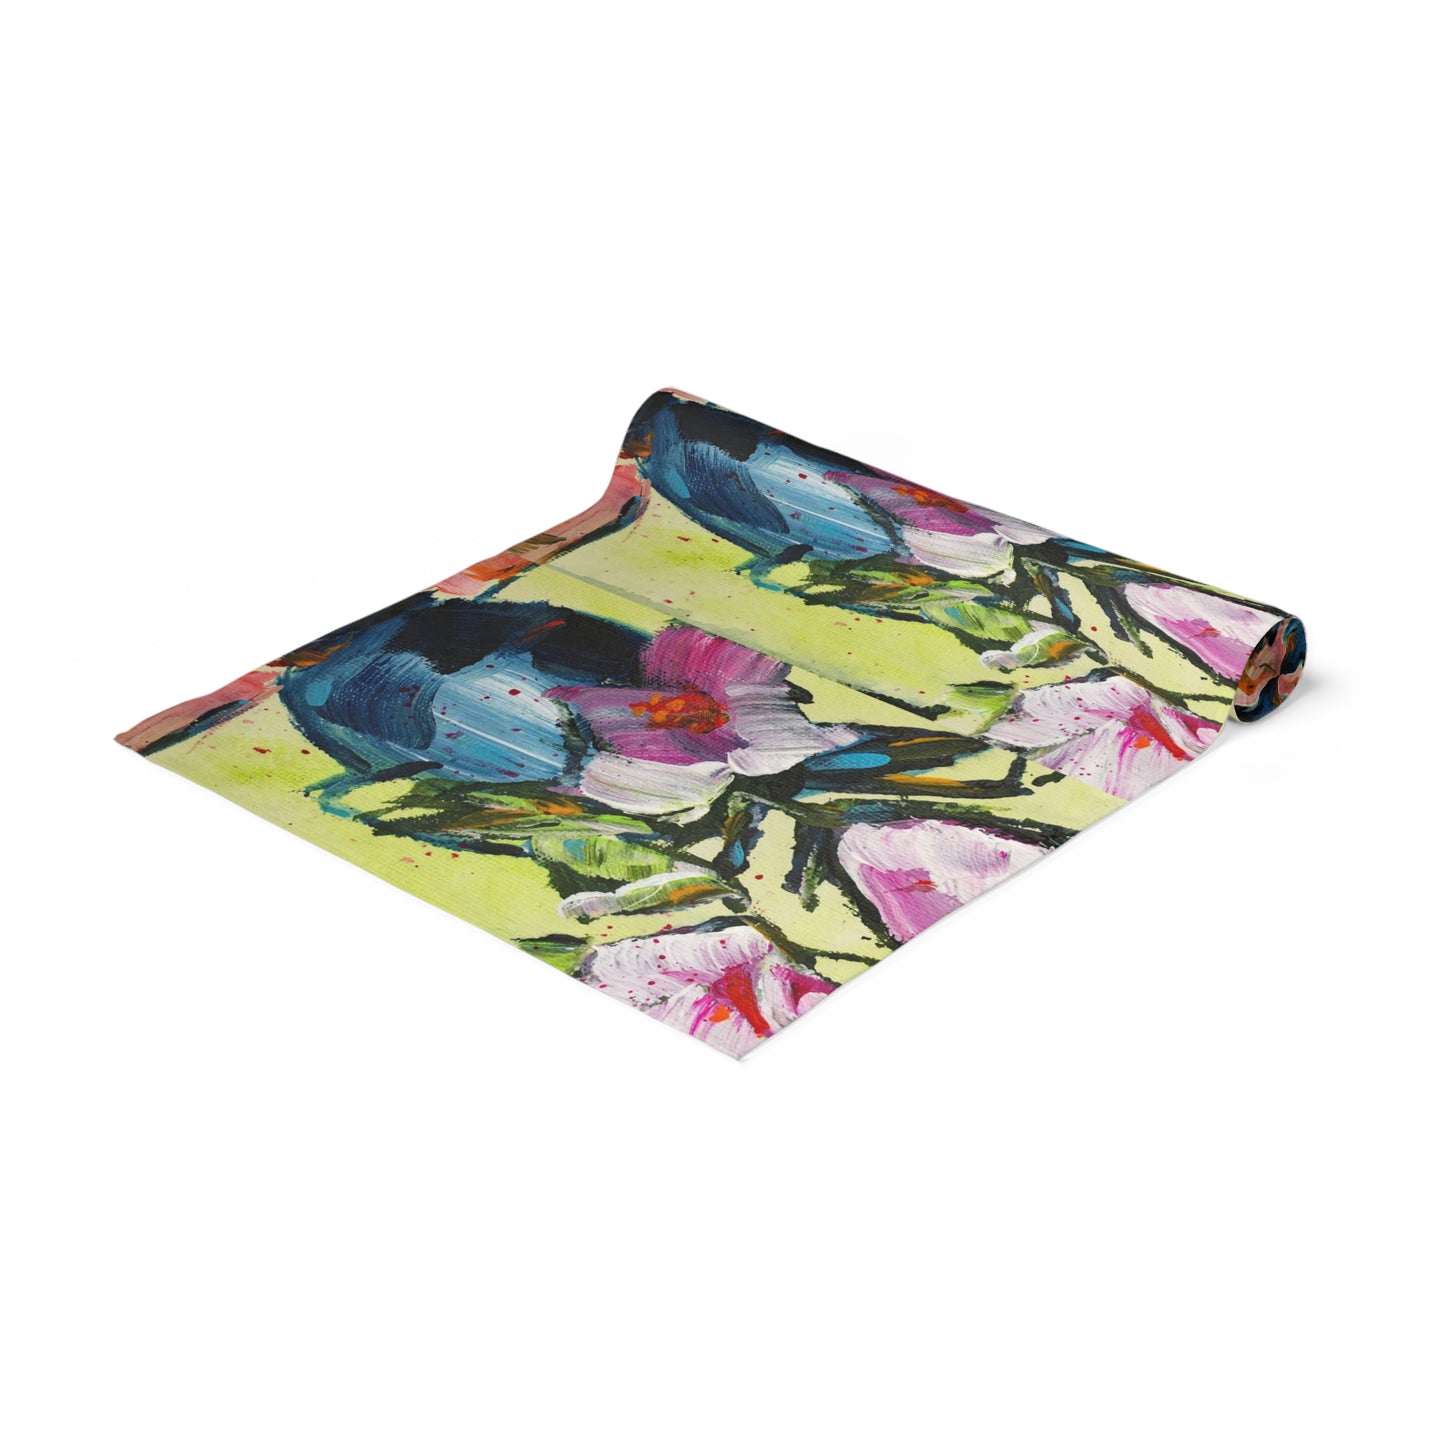 Copy of Pink Roses and Green Leaves Table Runner